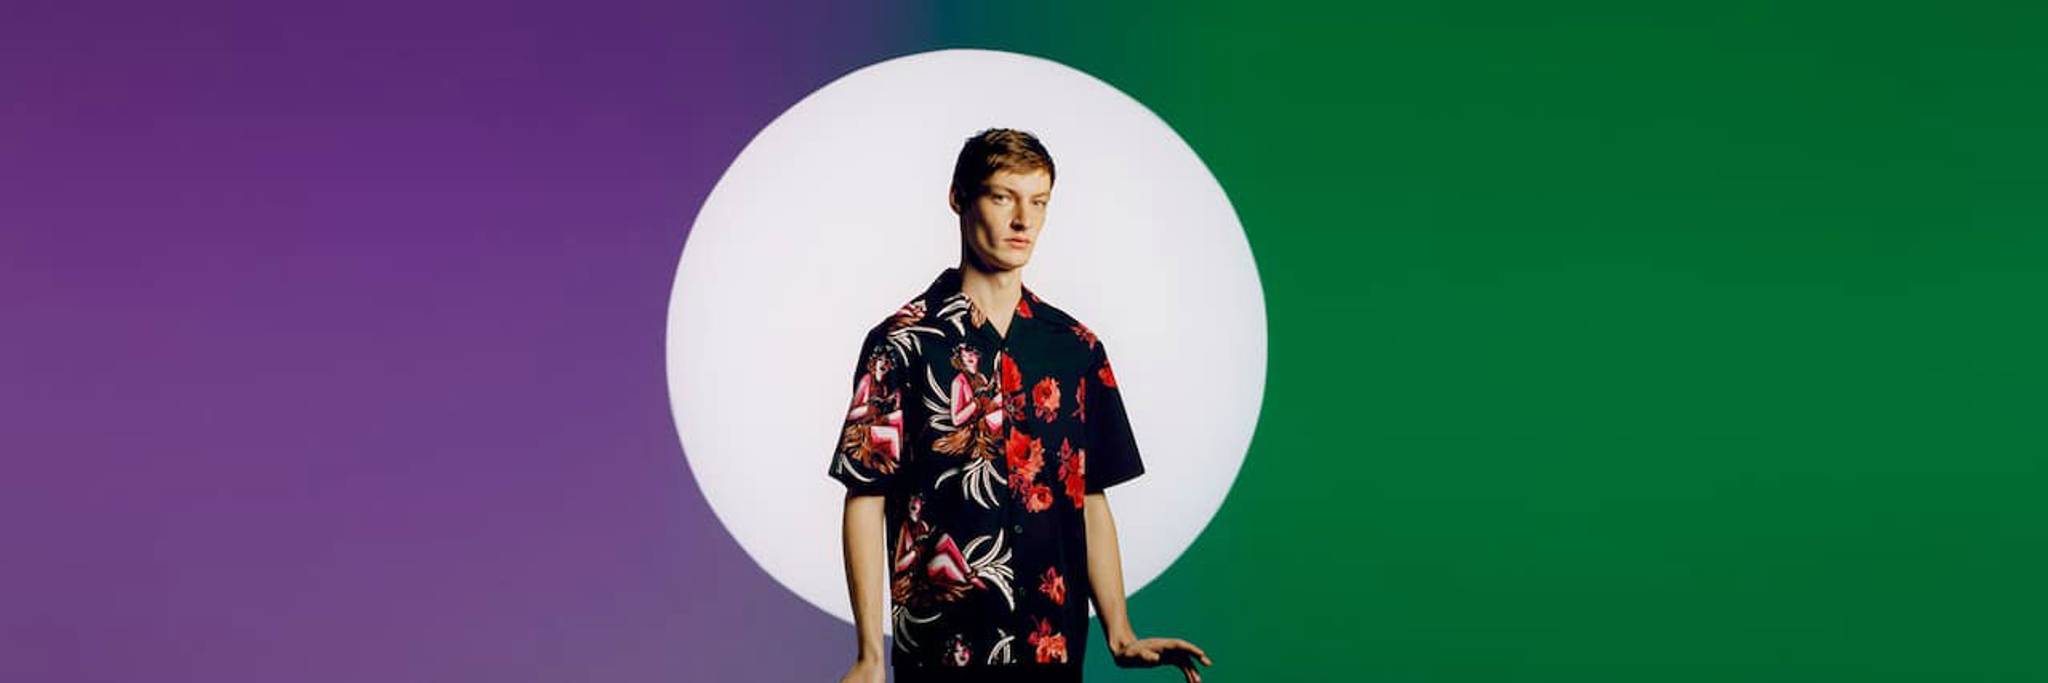 Prada gets personal with made-to-measure shirts